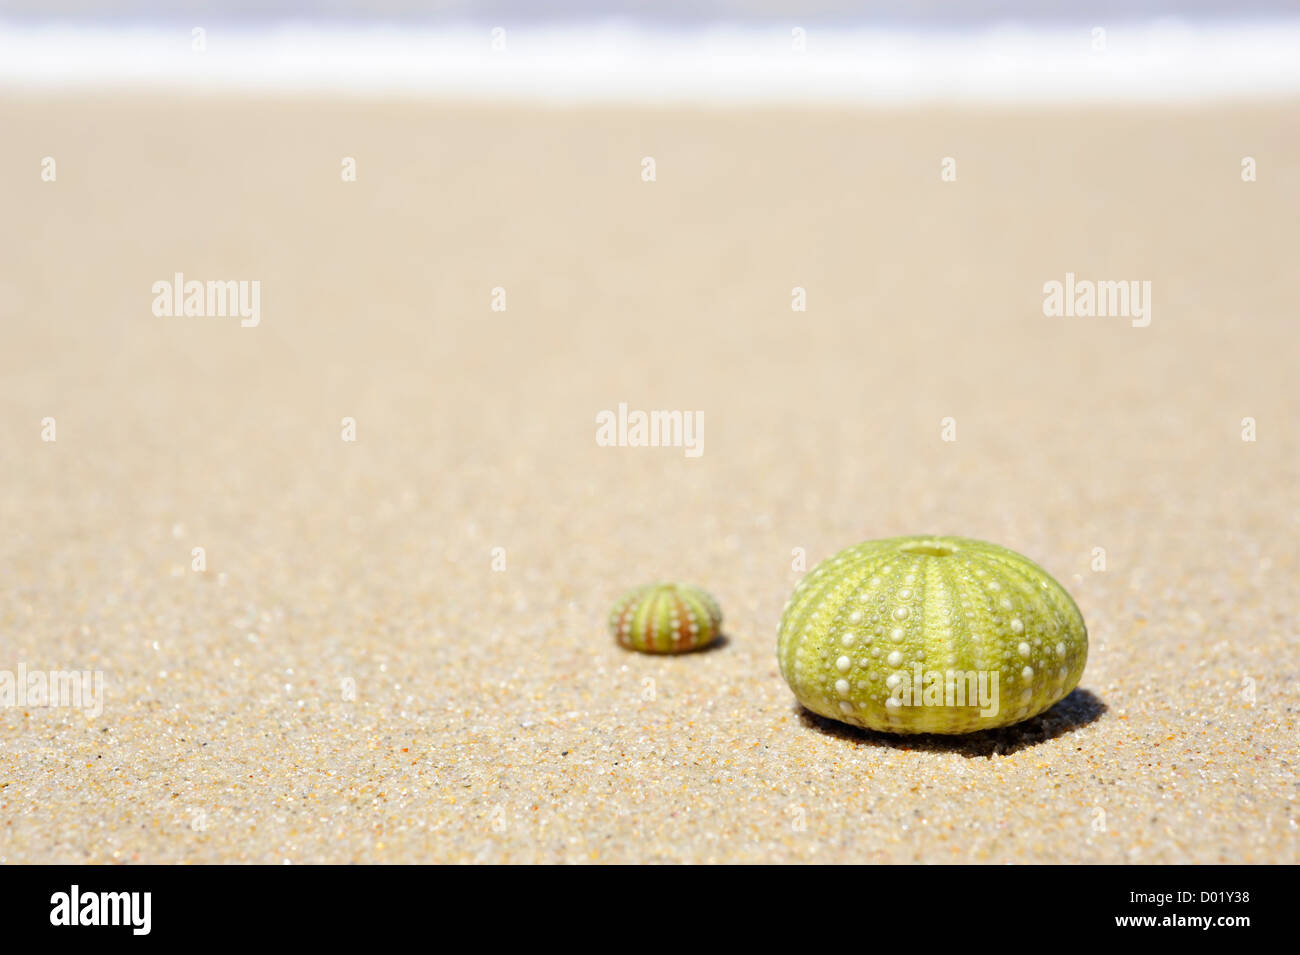 Beach scene with two dead sea urchin shells on a sunny day Stock Photo